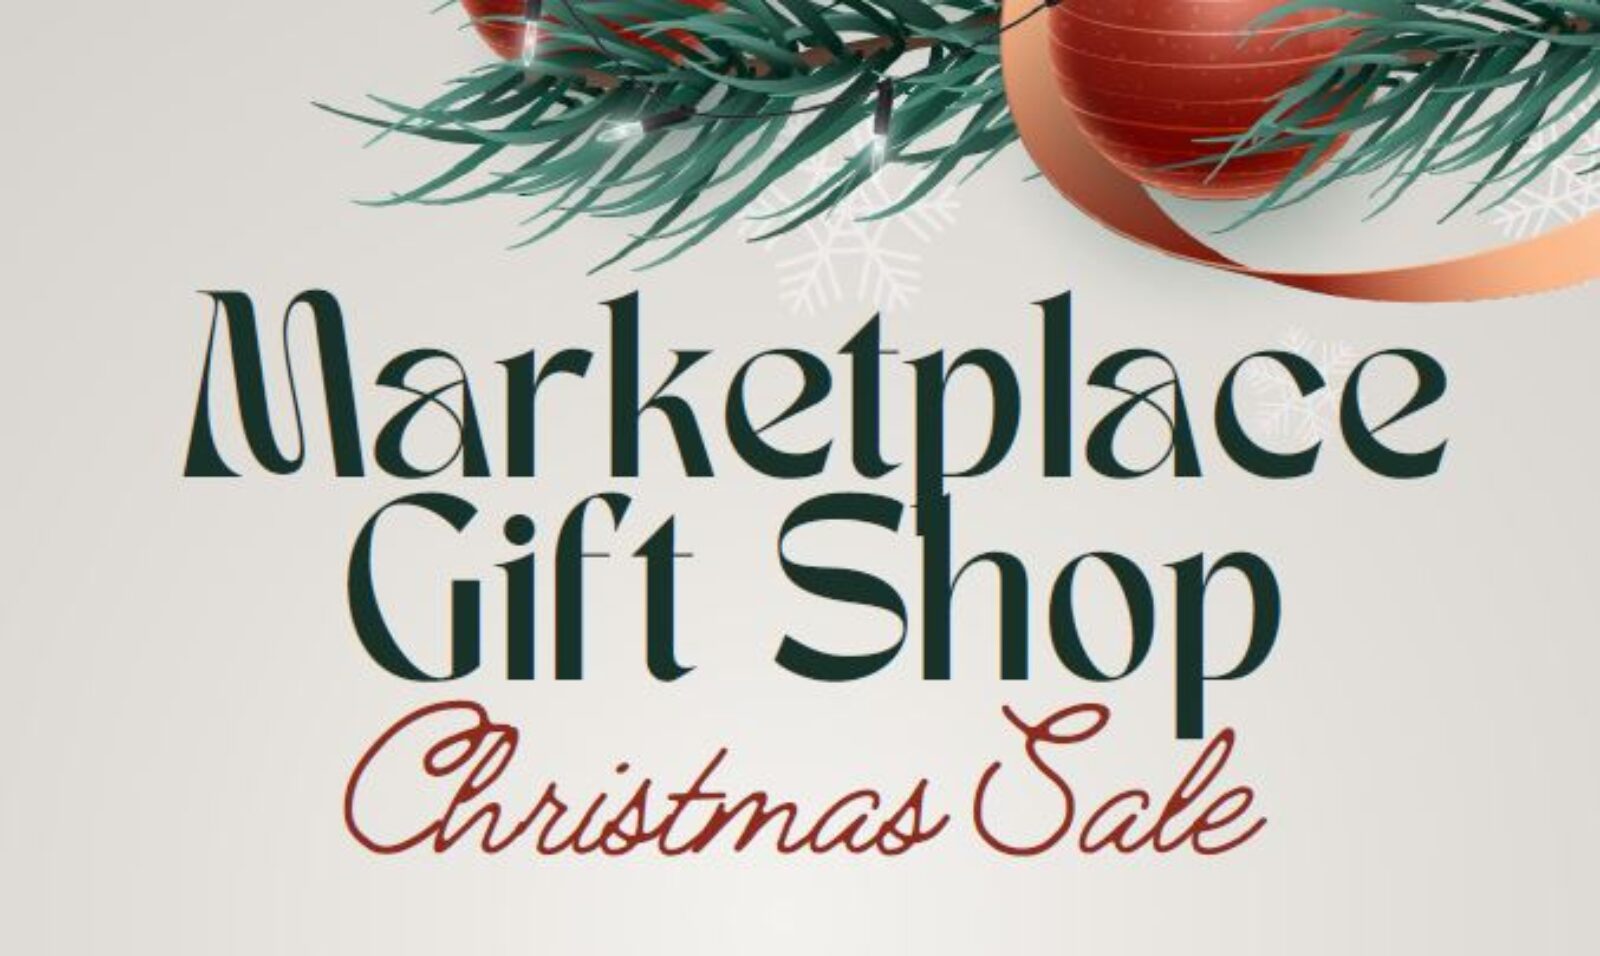 Marketplace Gift Shop Holiday Sale